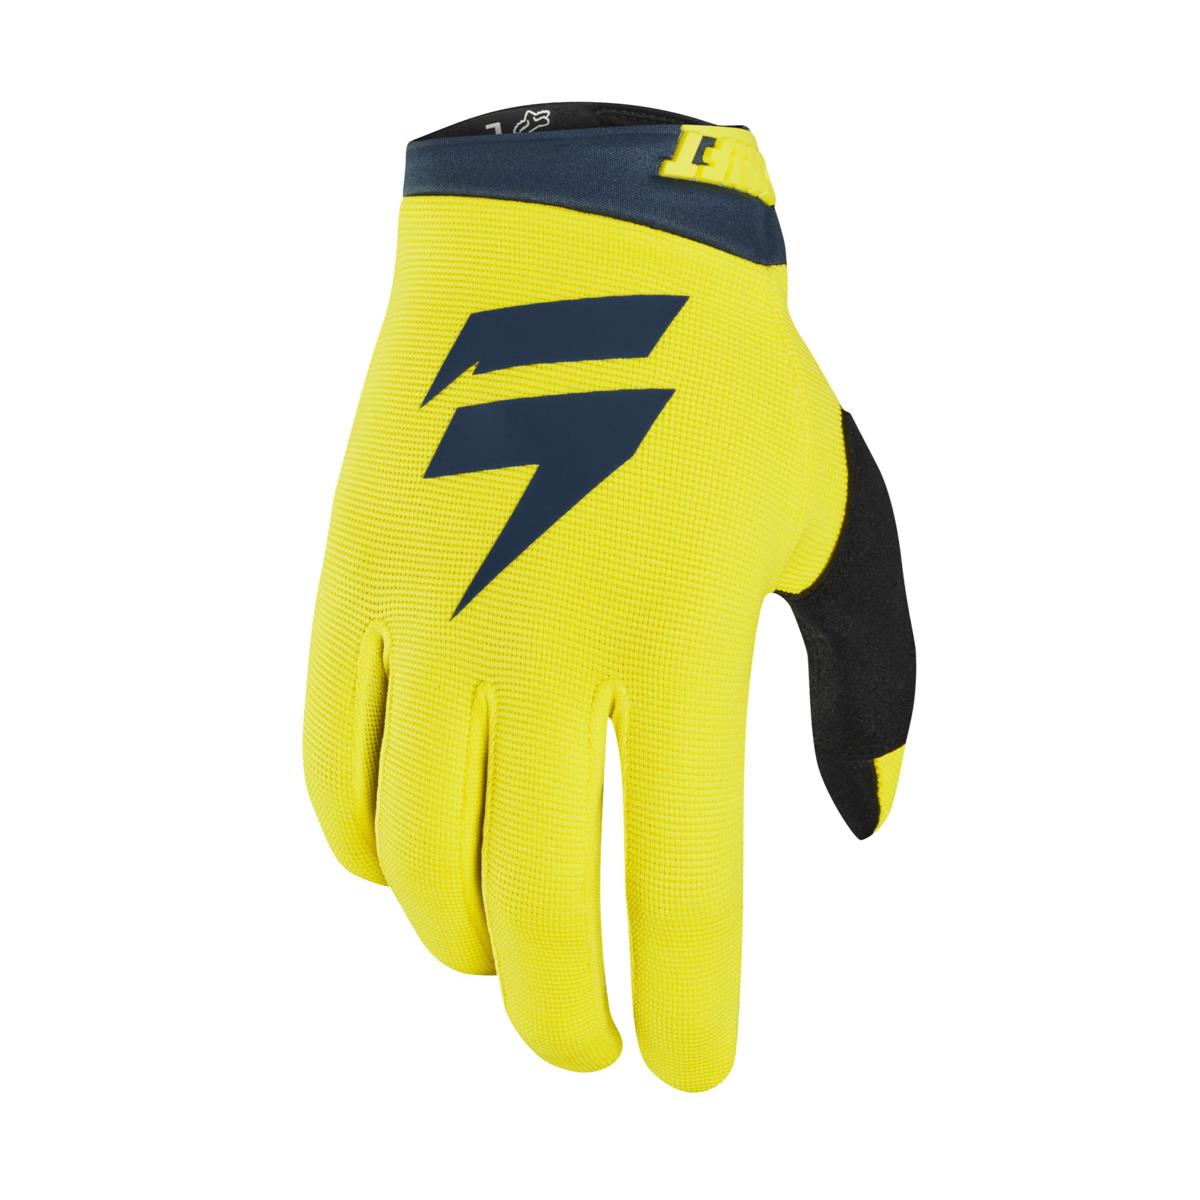 Shift Kids Gloves Whit3 Label Air Yellow/Navy